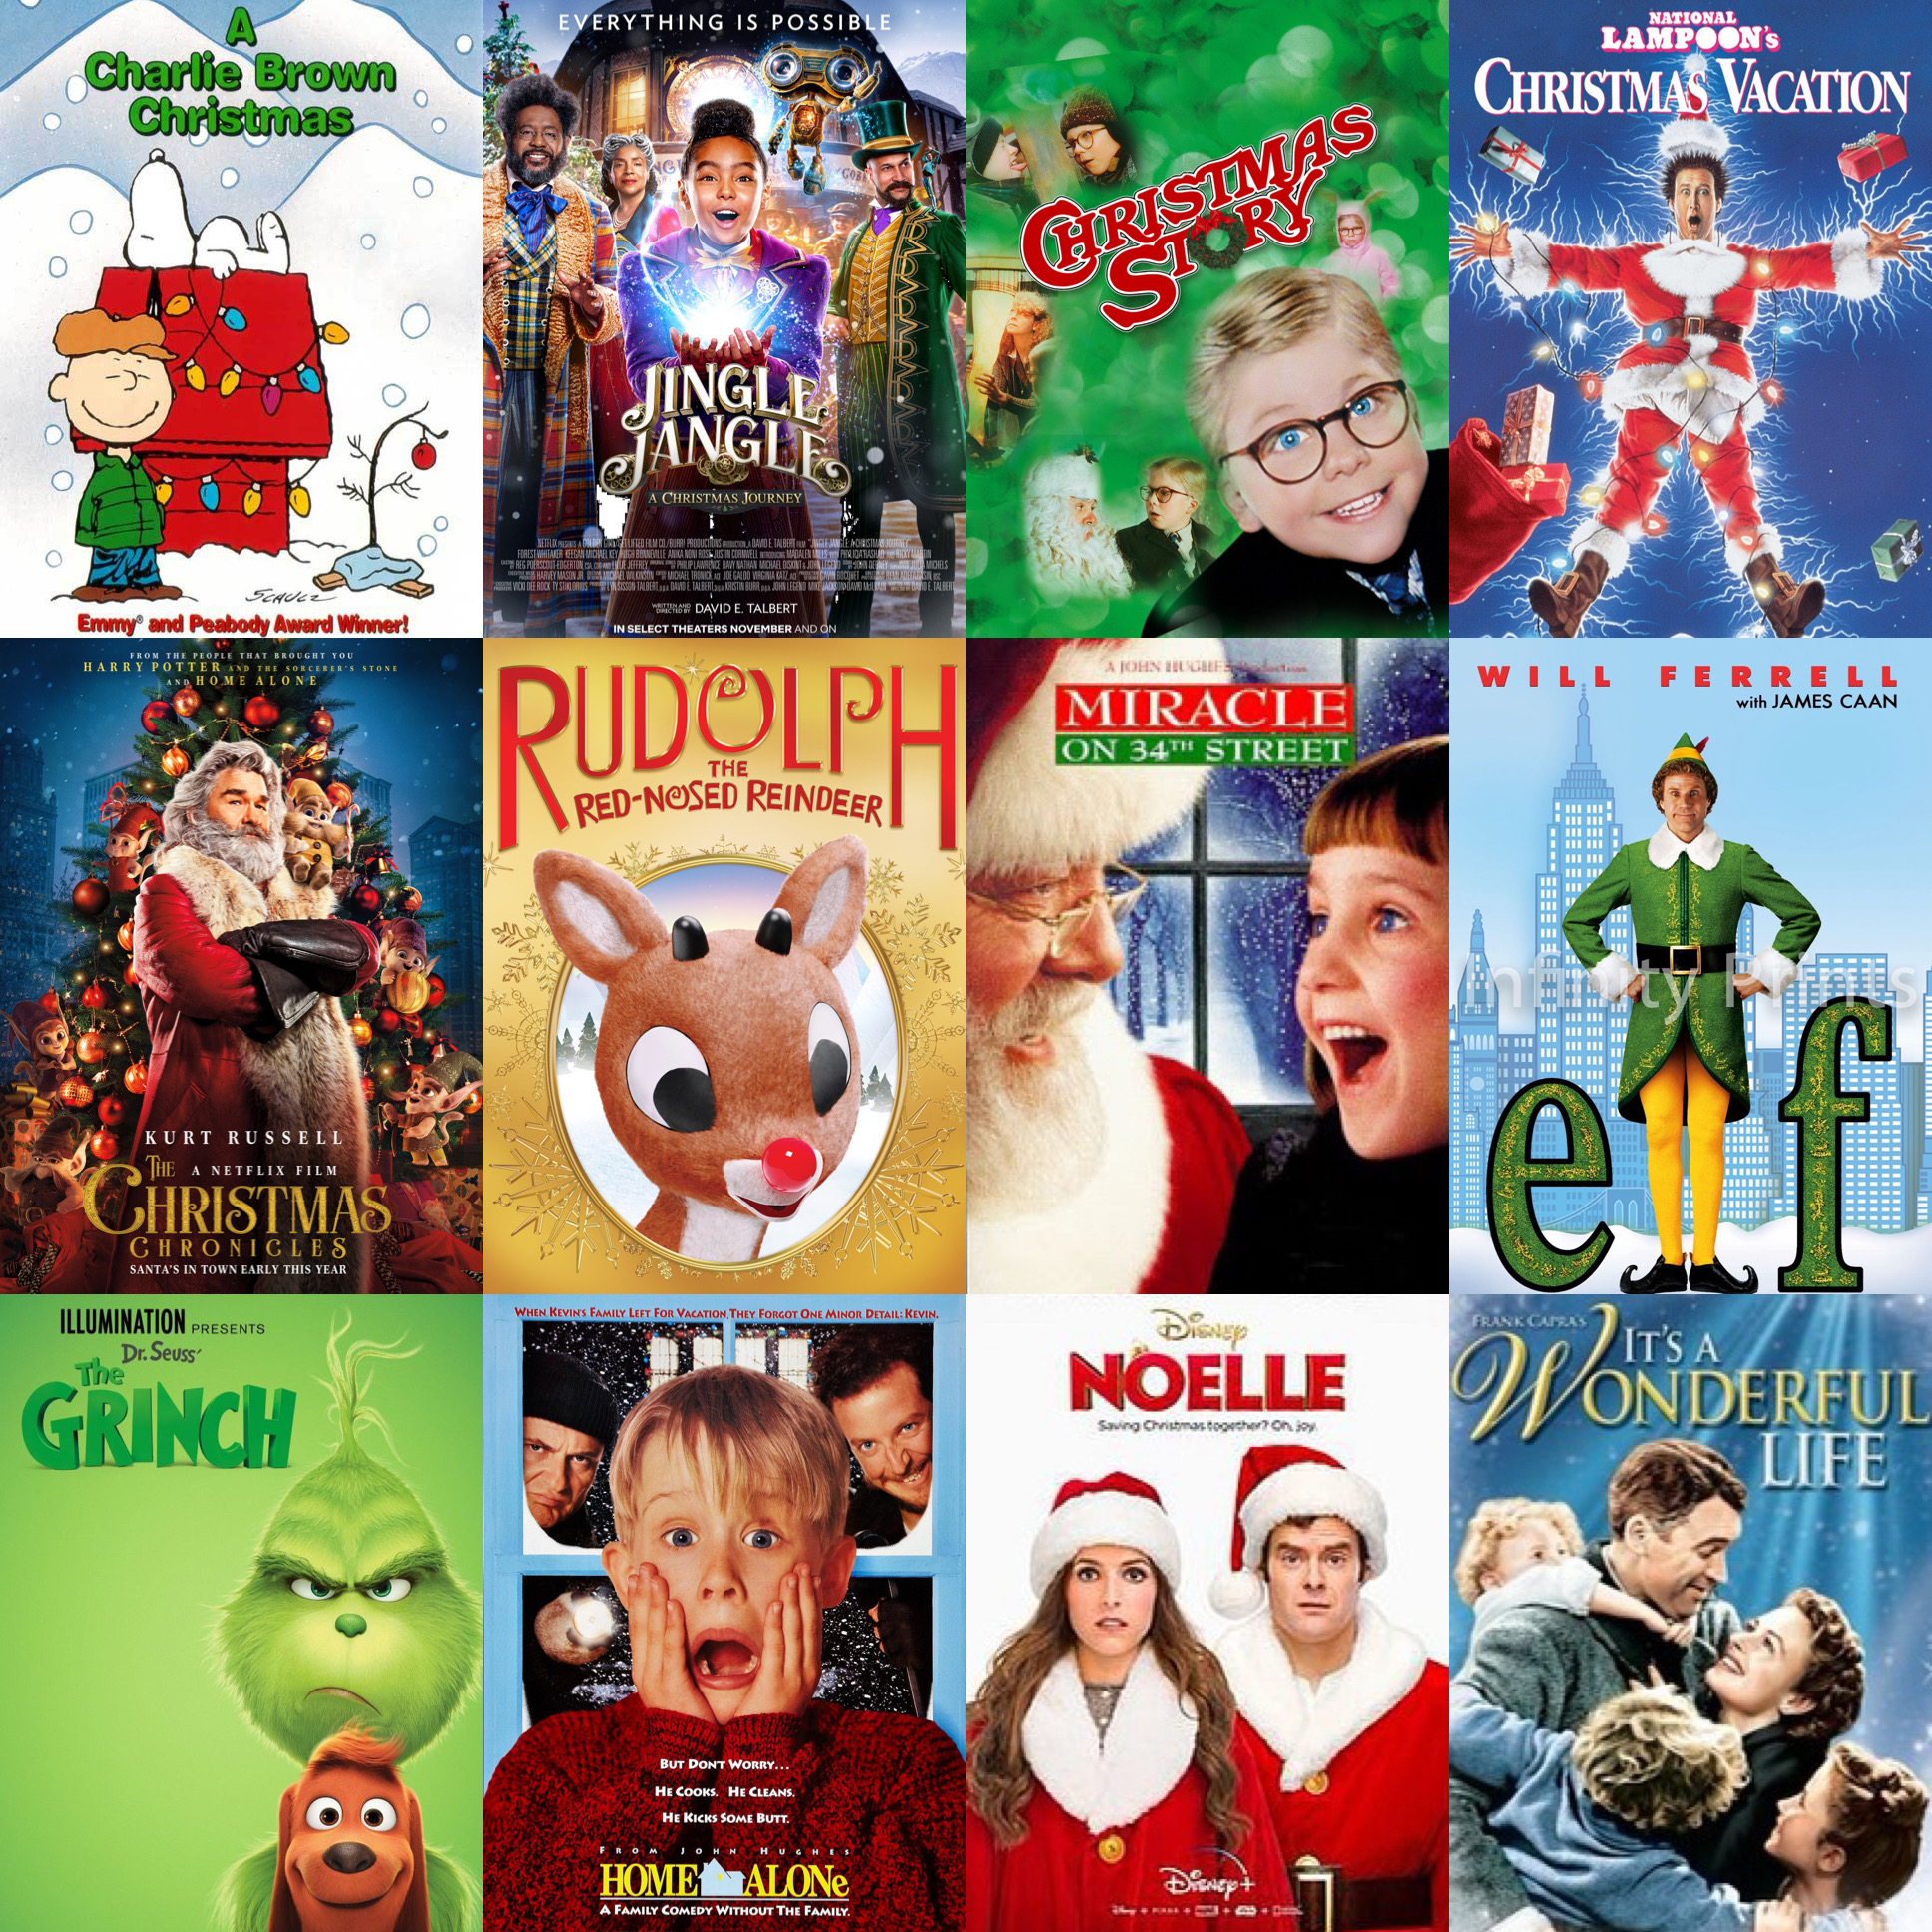 Christmas 5 holiday films to add in your bingewatching list